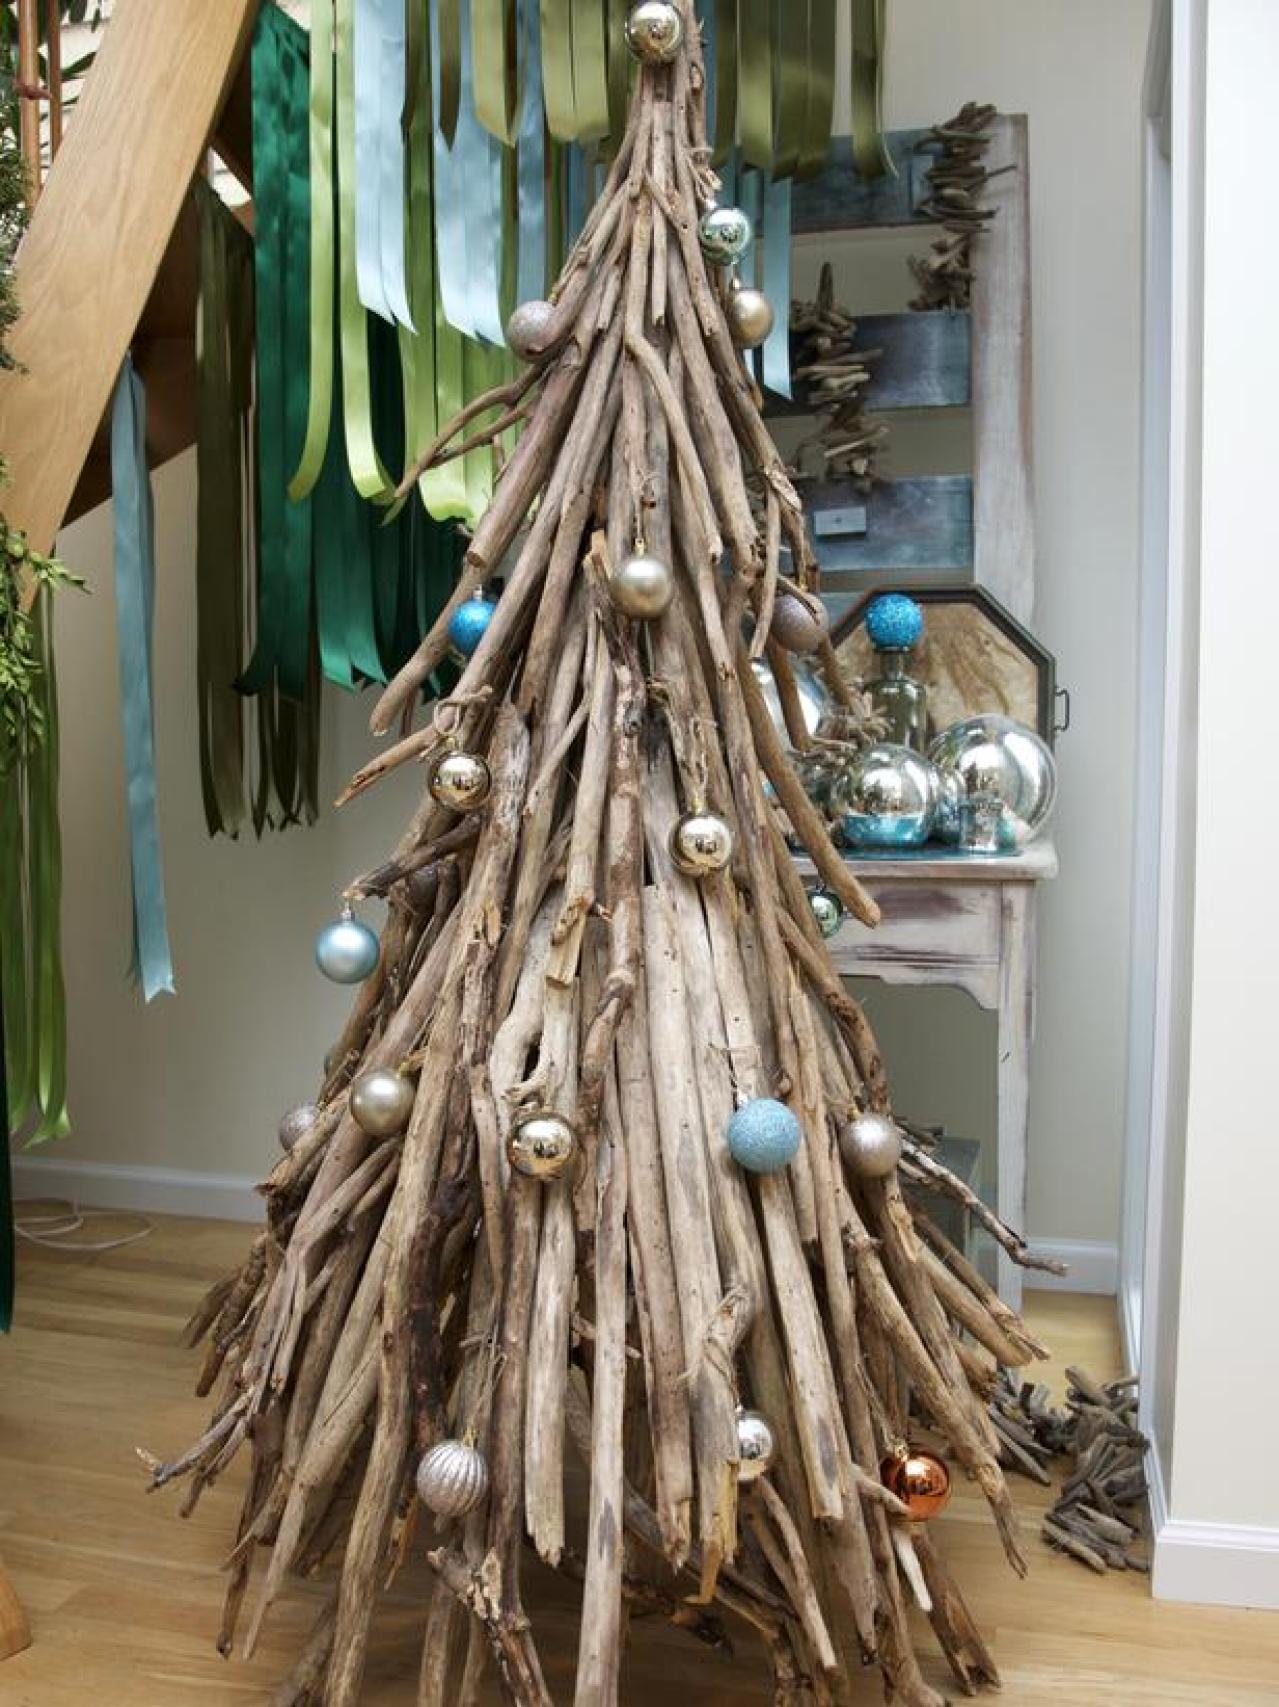 30 Cheerful and Cute Rustic Christmas Crafts Ideas  MagMent